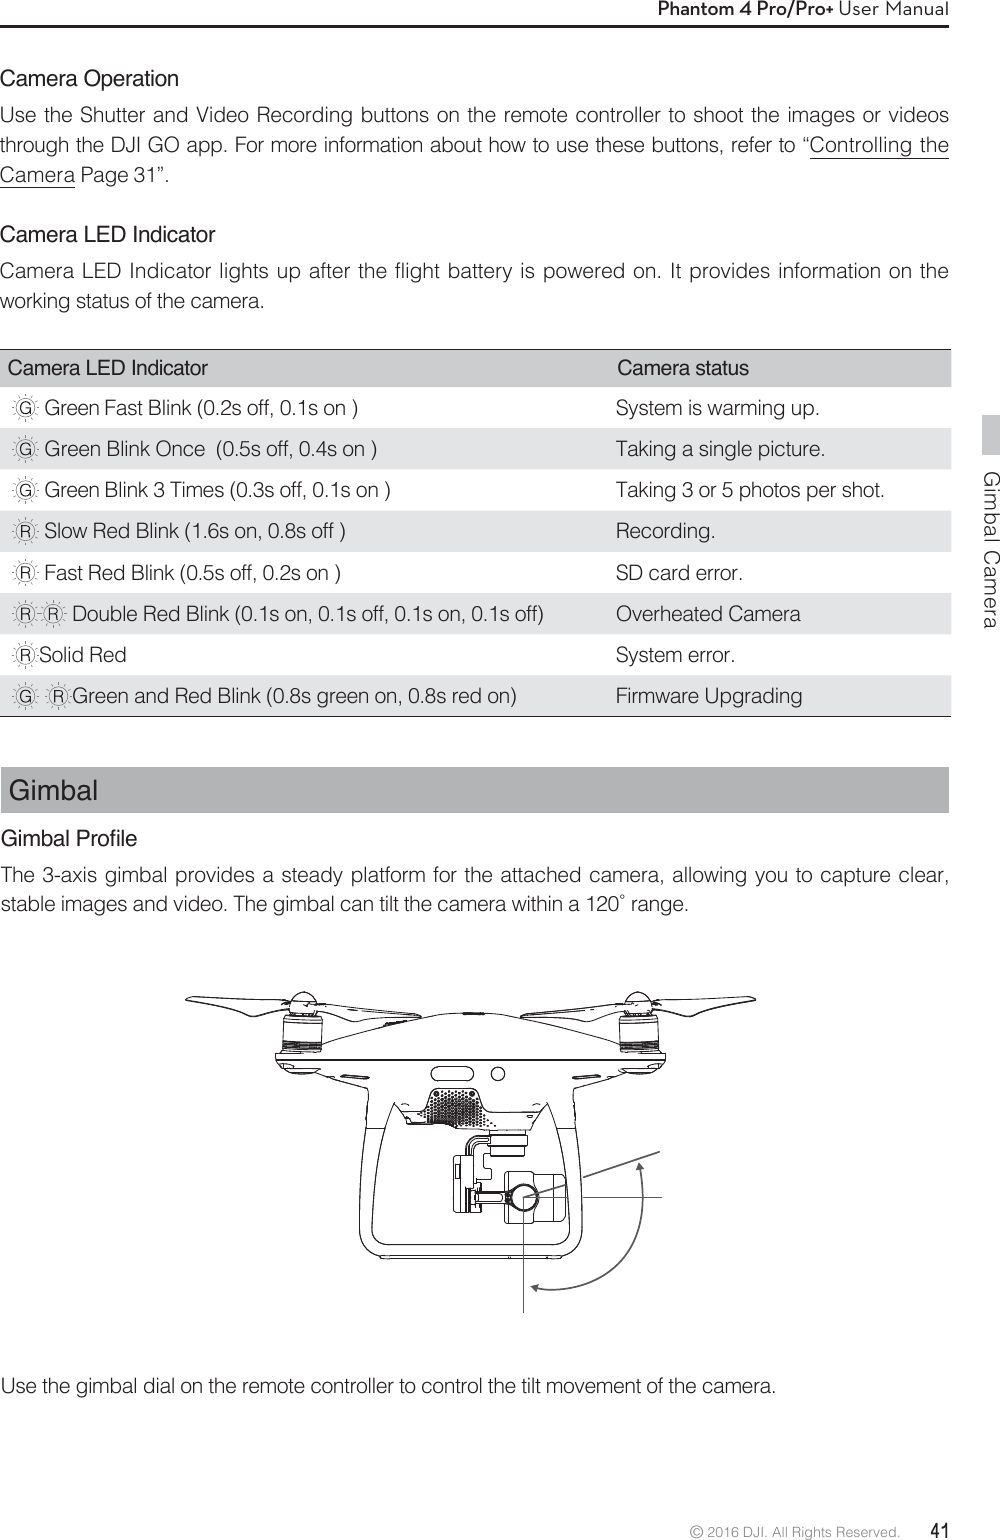 Gimbal Camera© 2016 DJI. All Rights Reserved.  41Phantom 4 Pro/Pro+ User ManualCamera OperationUse the Shutter and Video Recording buttons on the remote controller to shoot the images or videos through the DJI GO app. For more information about how to use these buttons, refer to “Controlling the Camera Page 31”. Camera LED IndicatorCamera LED Indicator lights up after the flight battery is powered on. It provides information on the working status of the camera.Camera LED Indicator Camera status  Green Fast Blink (0.2s off, 0.1s on ) System is warming up.   Green Blink Once  (0.5s off, 0.4s on ) Taking a single picture.  Green Blink 3 Times (0.3s off, 0.1s on ) Taking 3 or 5 photos per shot.   Slow Red Blink (1.6s on, 0.8s off ) Recording.  Fast Red Blink (0.5s off, 0.2s on ) SD card error.  Double Red Blink (0.1s on, 0.1s off, 0.1s on, 0.1s off) Overheated Camera Solid Red   System error.   Green and Red Blink (0.8s green on, 0.8s red on) Firmware UpgradingGimbal*LPEDO3URÀOHThe 3-axis gimbal provides a steady platform for the attached camera, allowing you to capture clear, TUBCMFJNBHFTBOEWJEFP5IFHJNCBMDBOUJMUUIFDBNFSBXJUIJOBSBOHFUse the gimbal dial on the remote controller to control the tilt movement of the camera. 